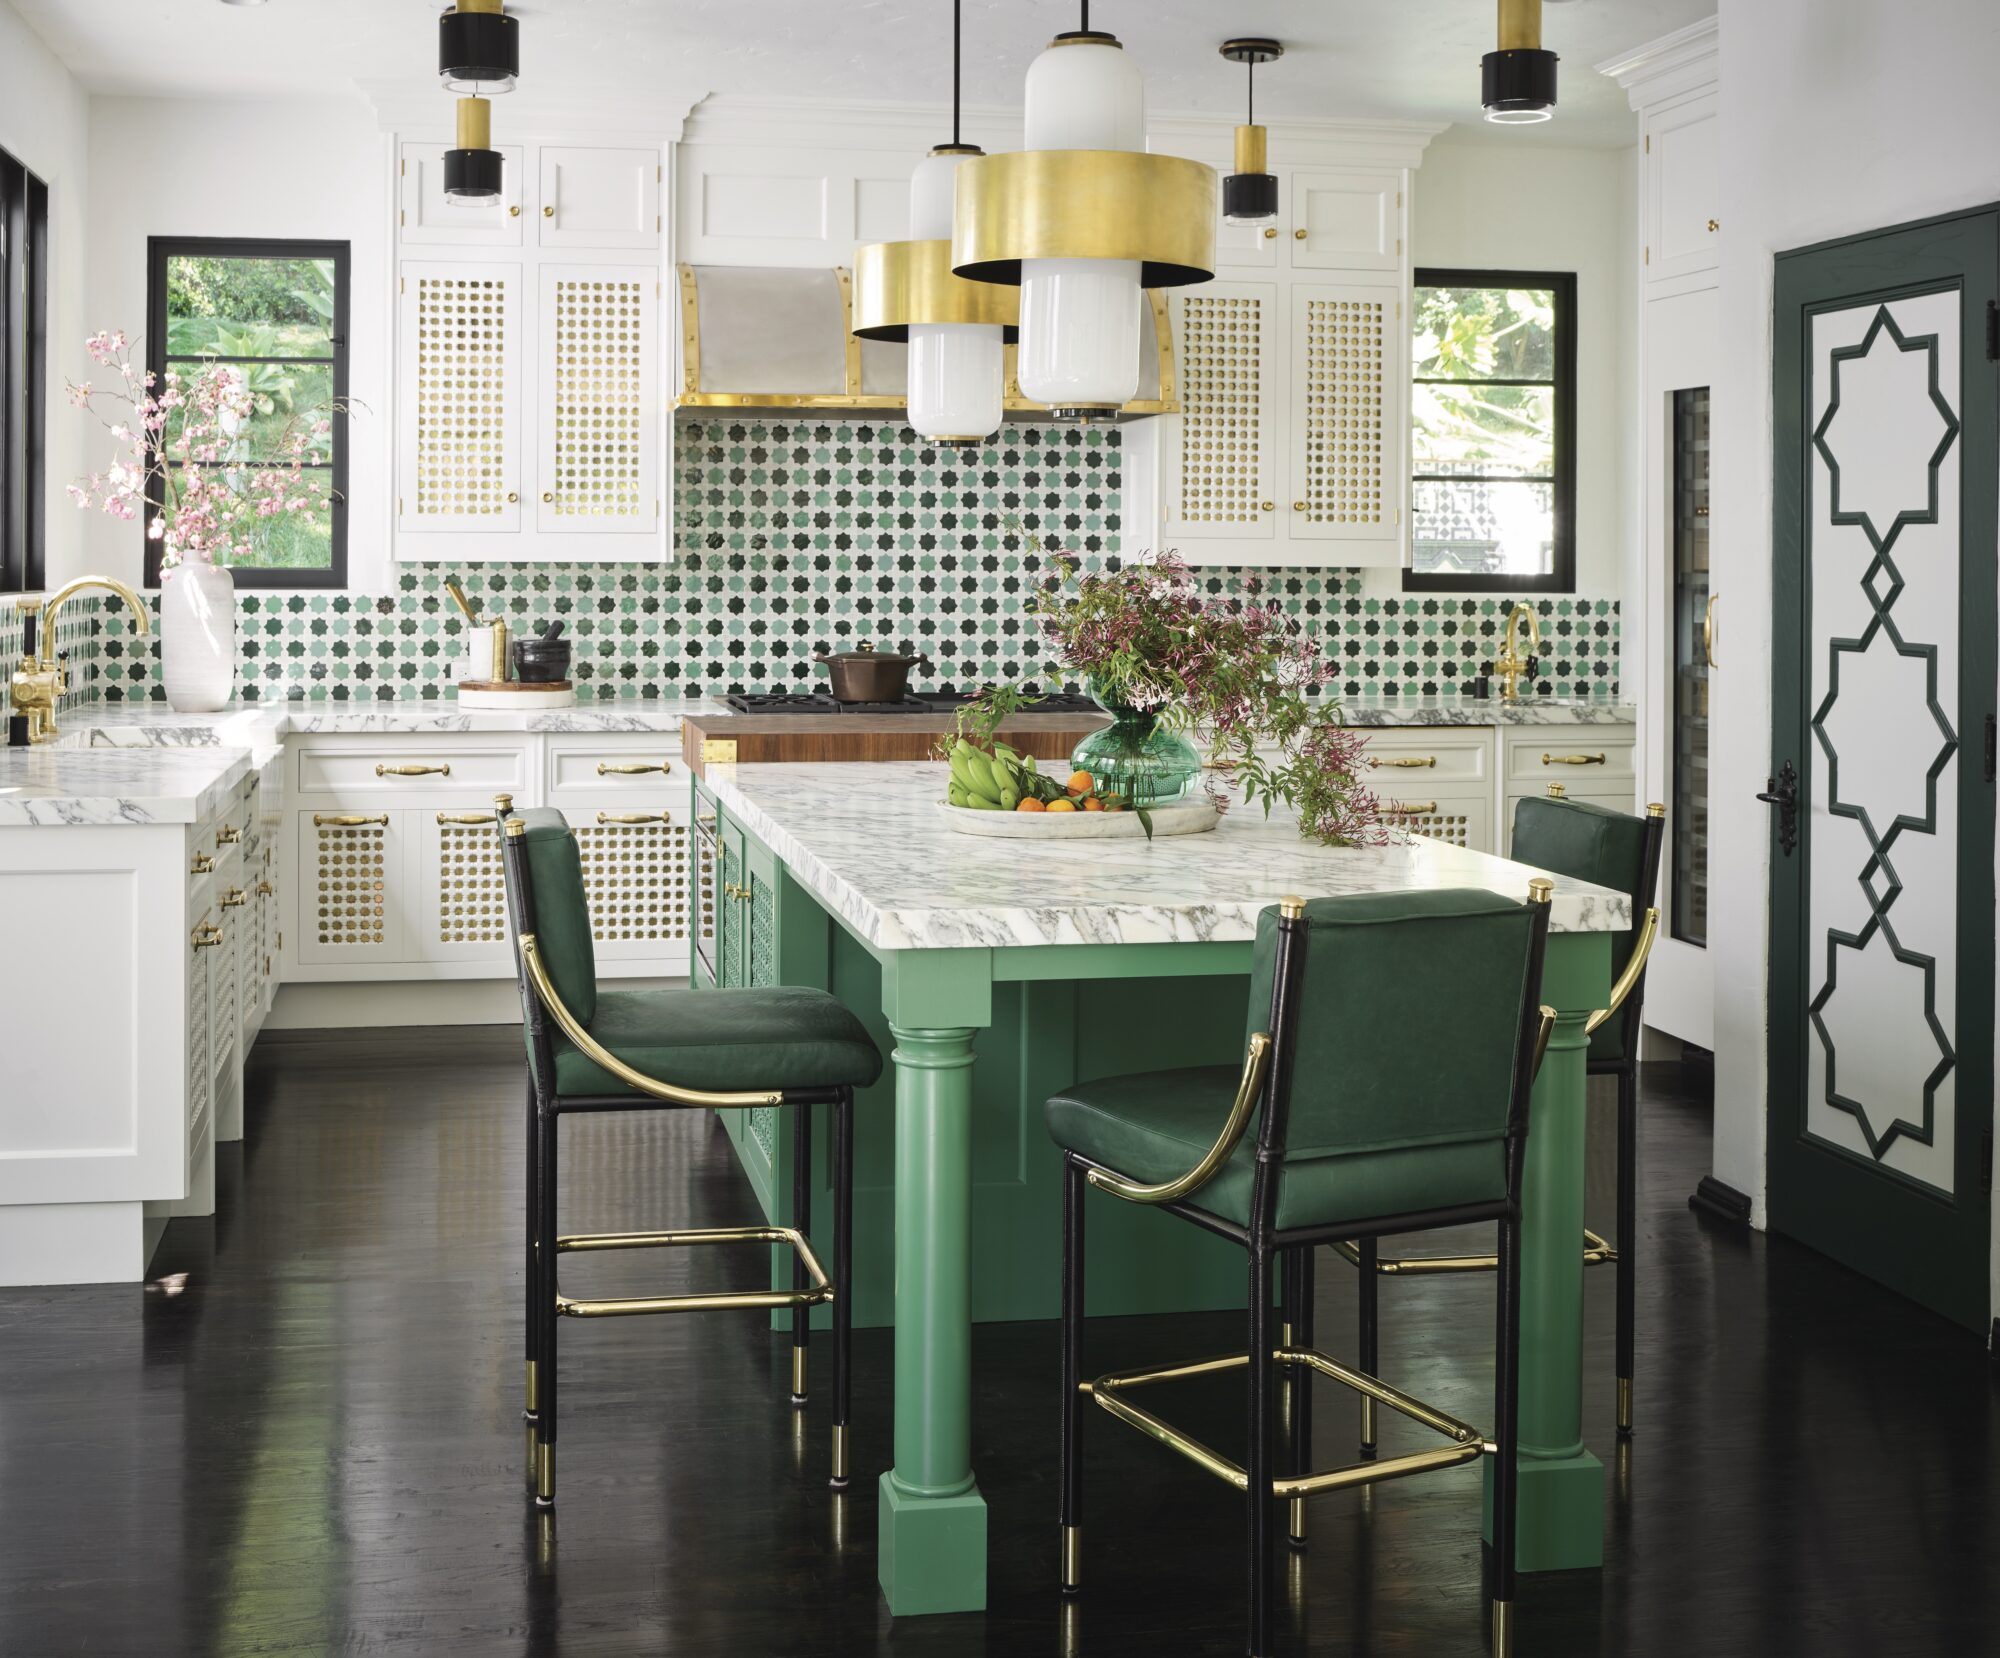 A ktichen with a green, marble-topped island, white cabinetry and a green-and-white backsplash.